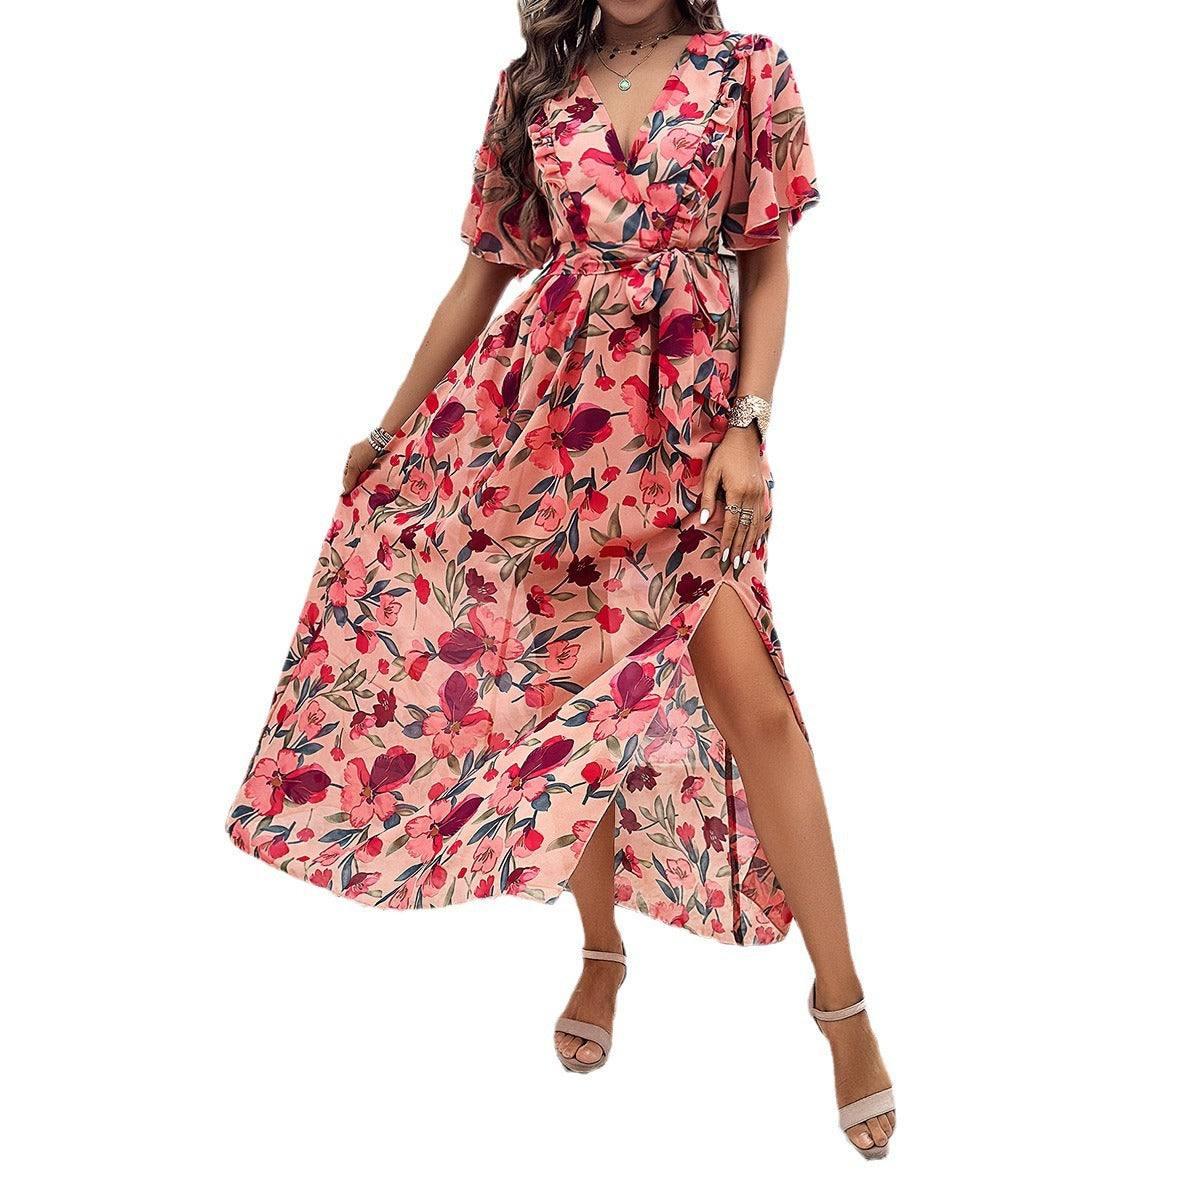 Women's Fashion Vacation Casual Printed Dress-5